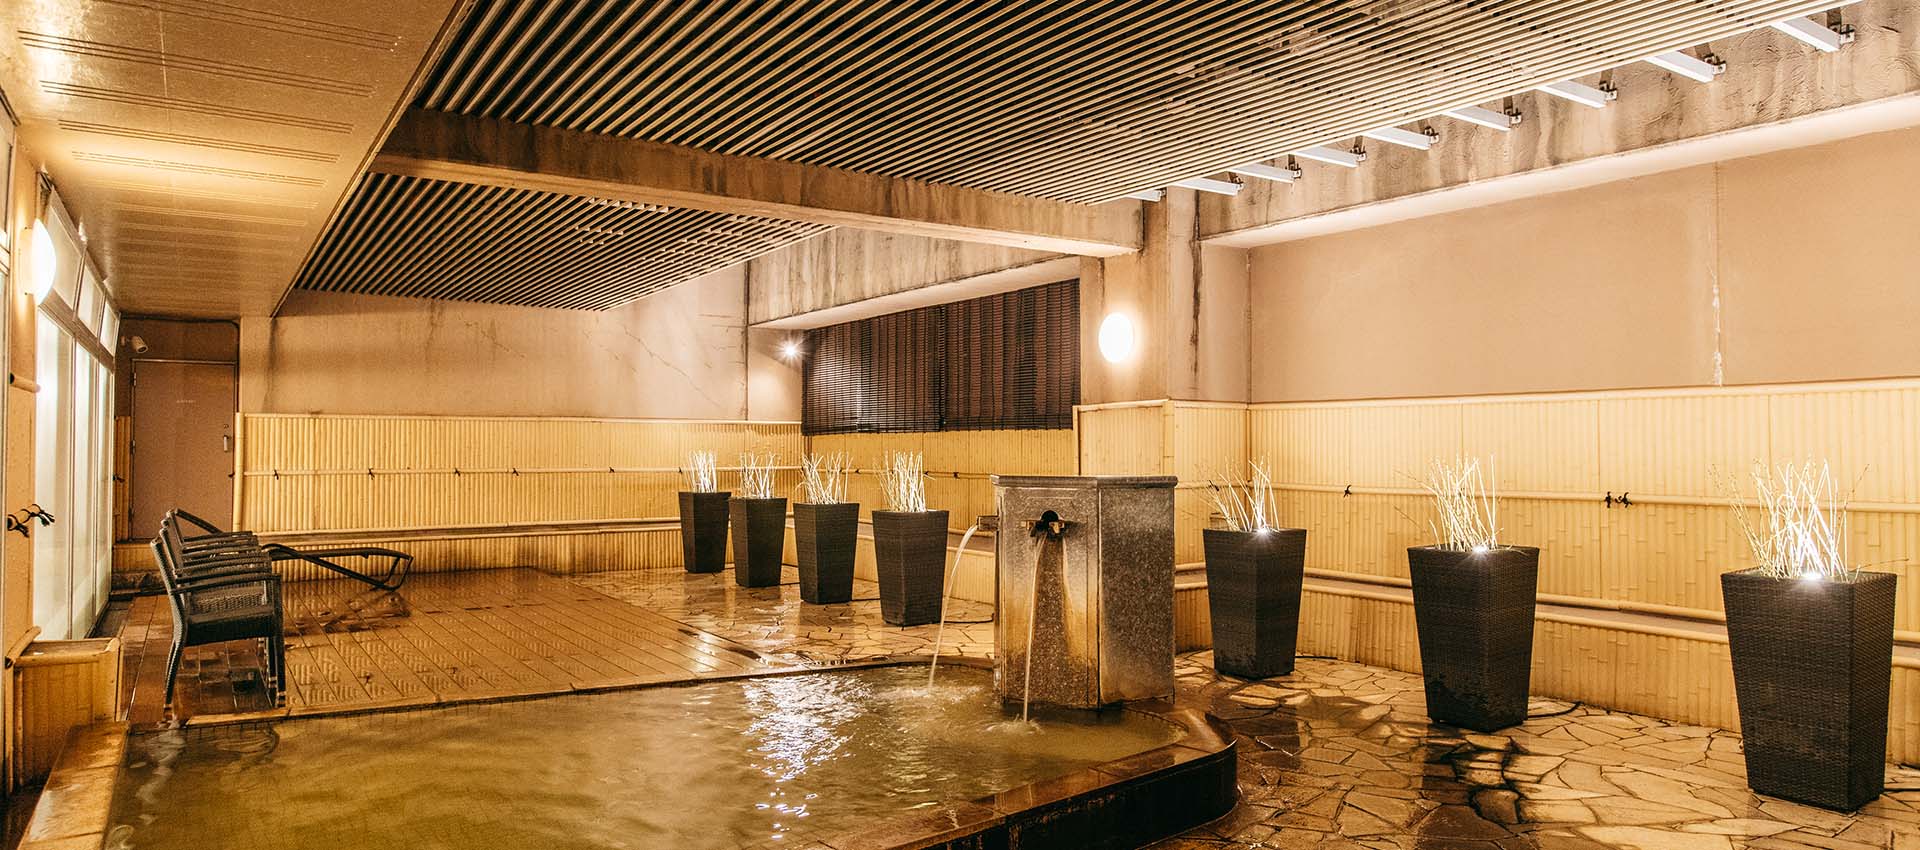 Beppu Onsen has an abundant amount Hot springs. It soothes the fatigue of mind and body.